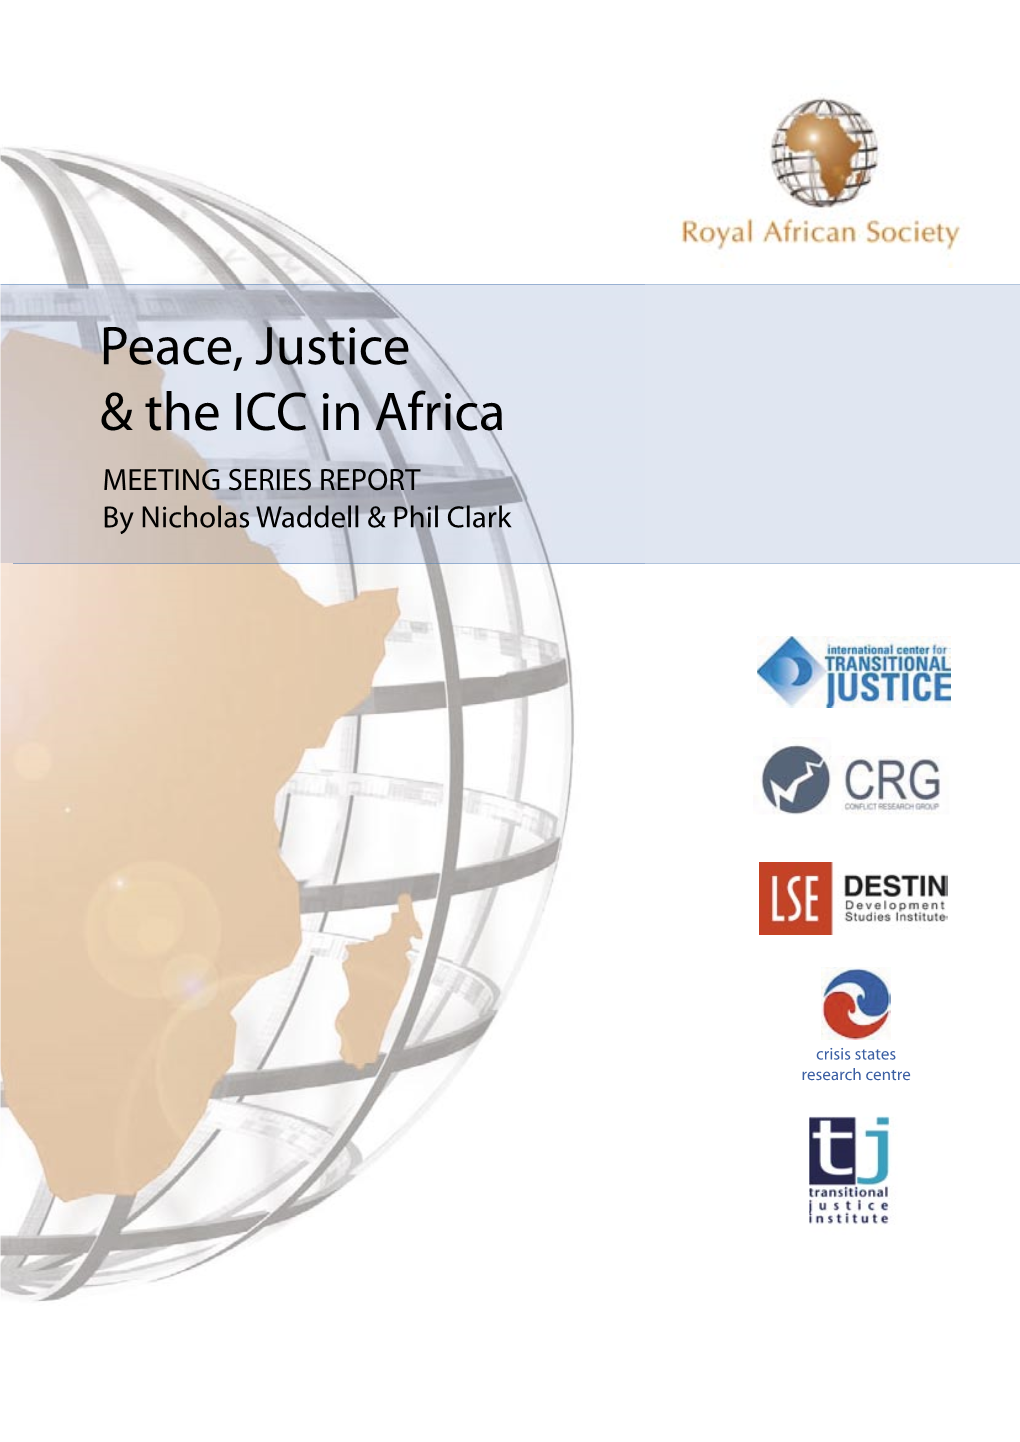 Peace, Justice & the ICC in Africa